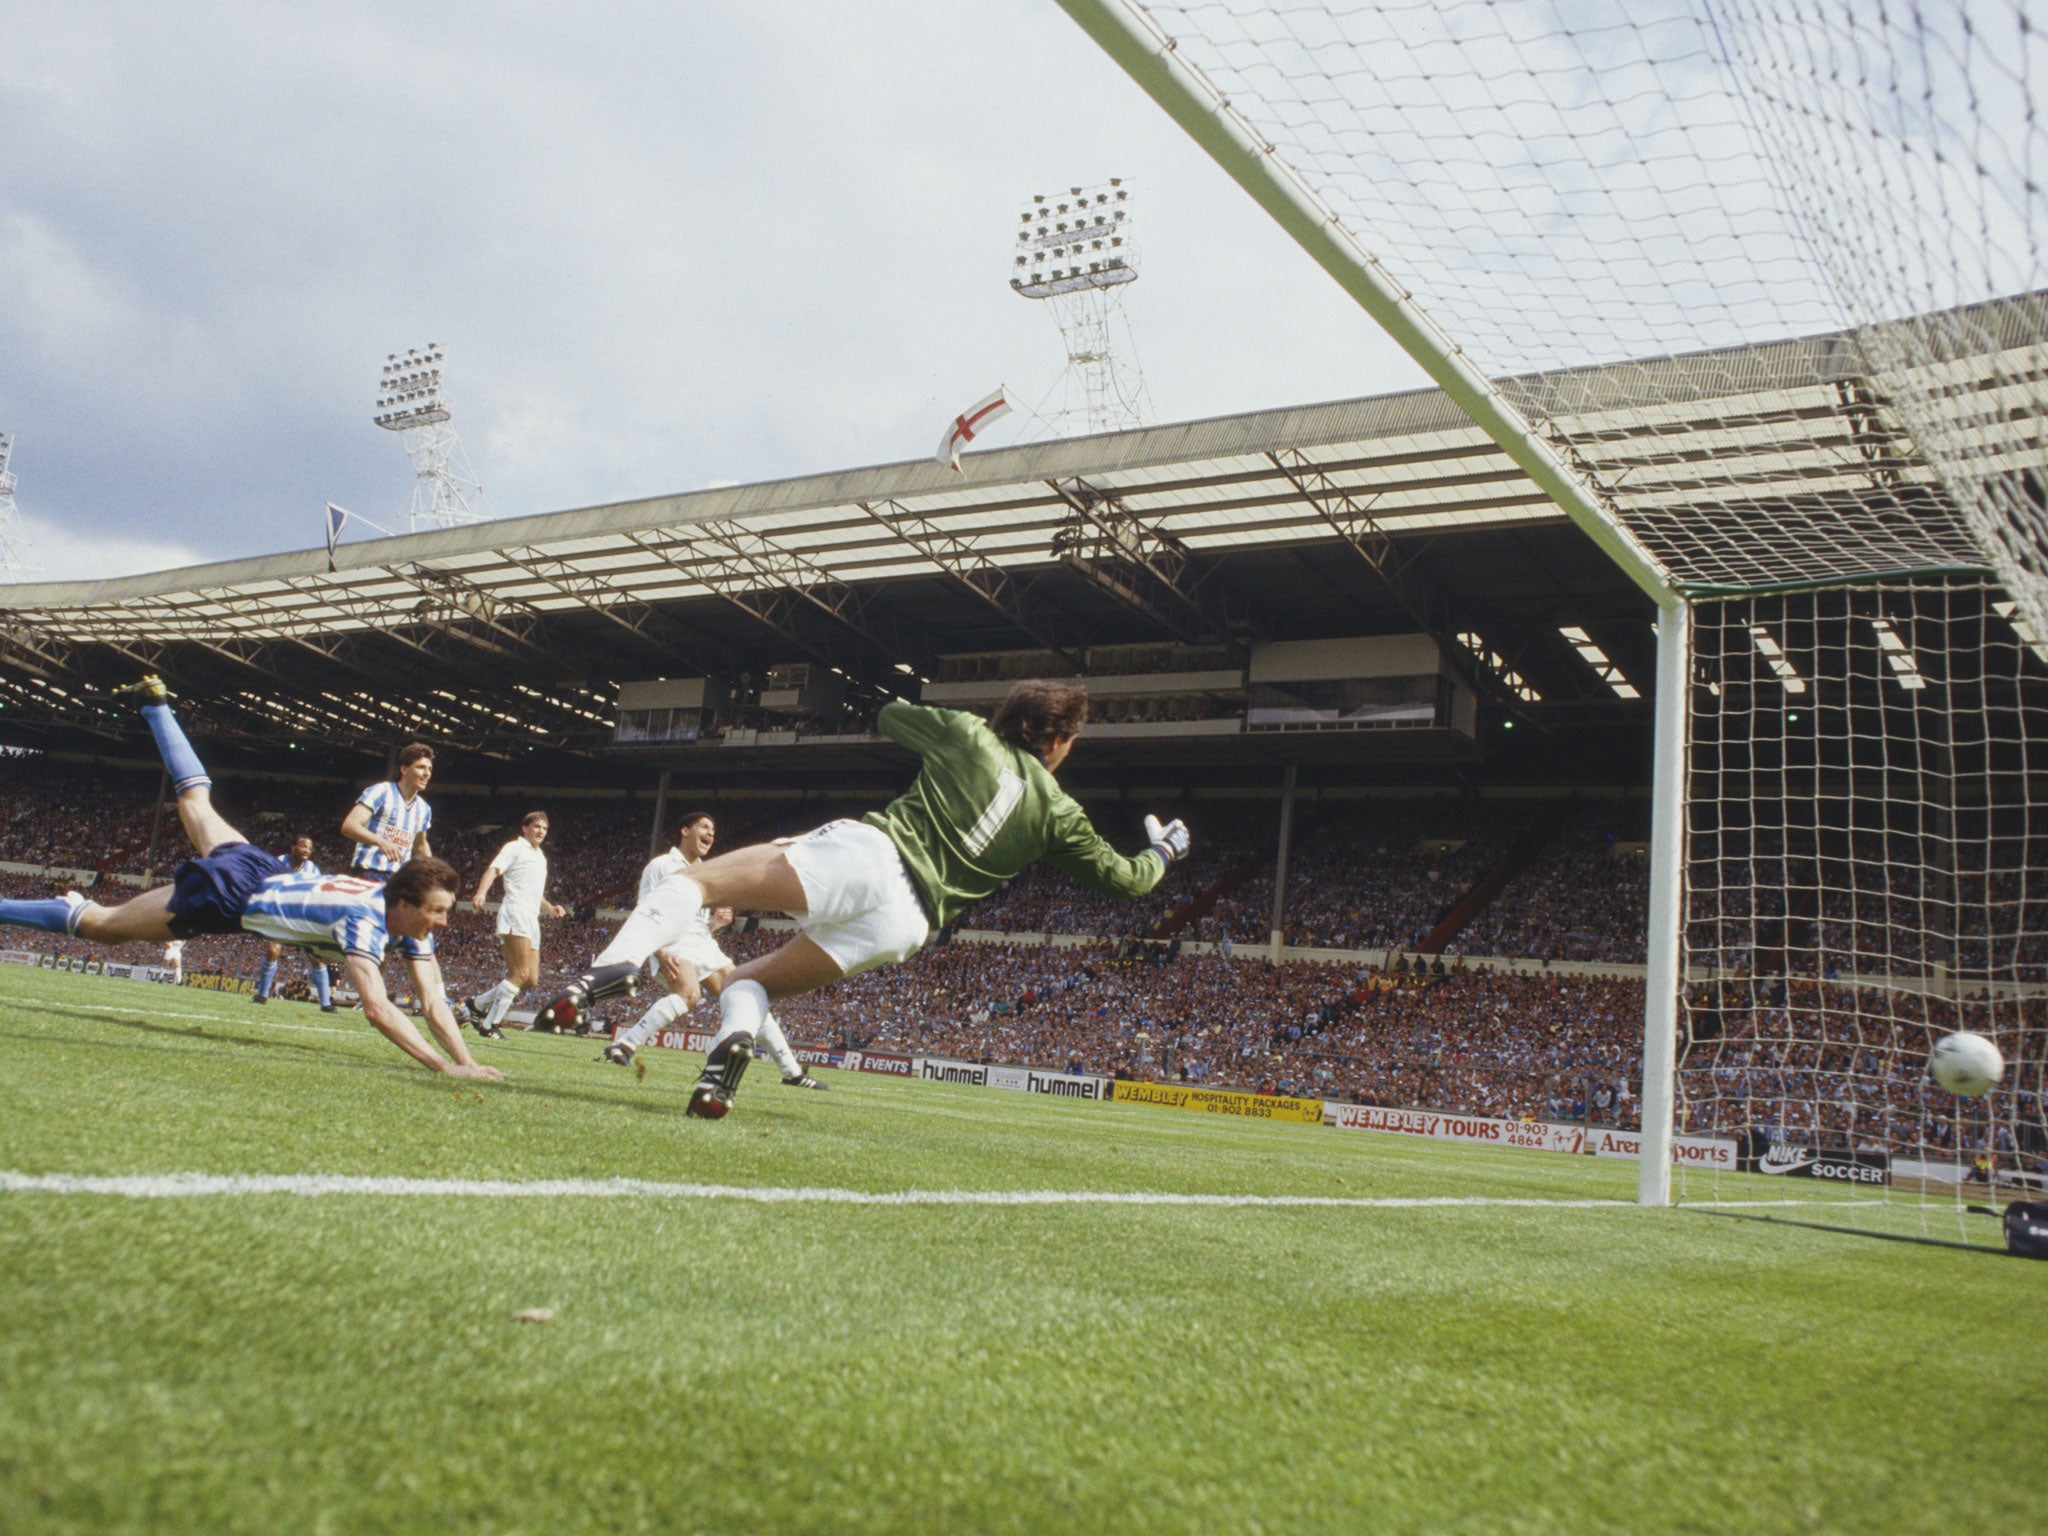 Keith Houchen heads Coventry's second goal past Tottenham goalkeeper Ray Clemence in the 1987 final